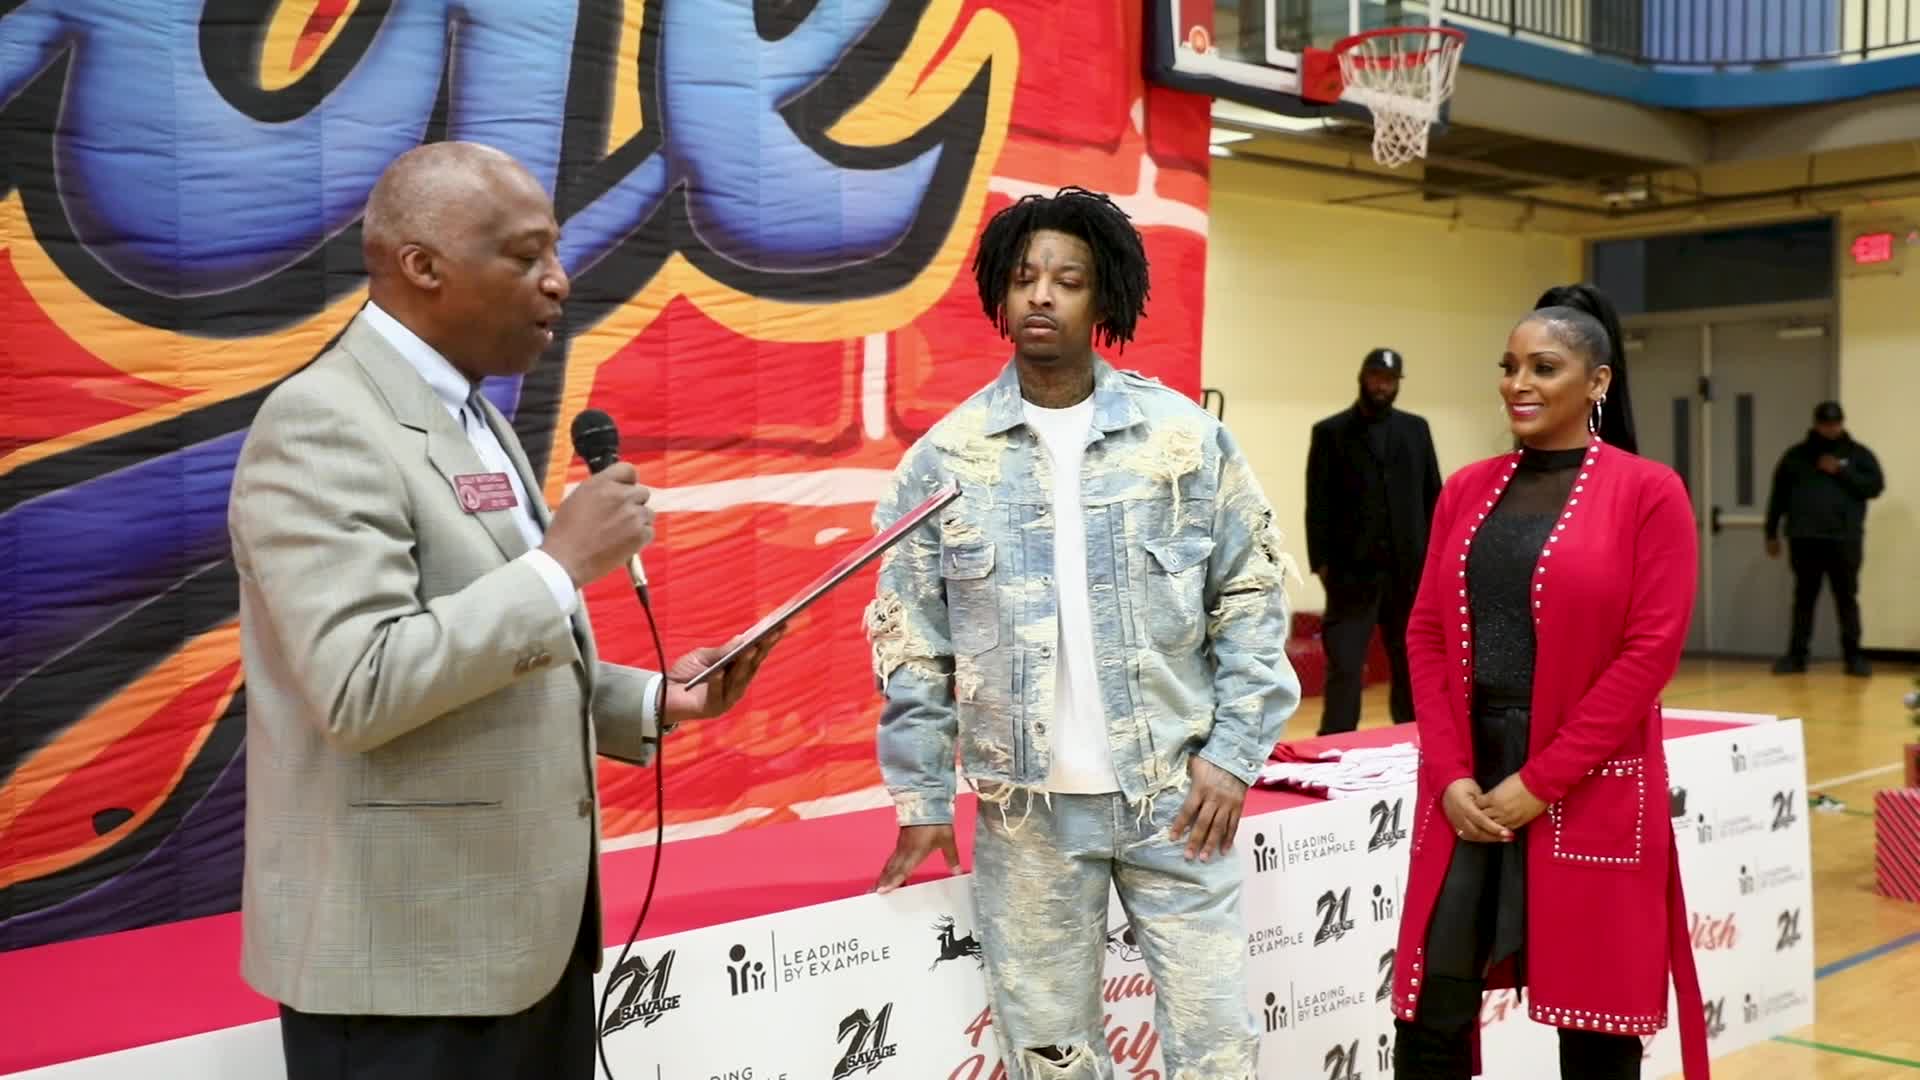 21 Savage Gives Christmas Gifts to Over 30 Kids in Georgia - XXL